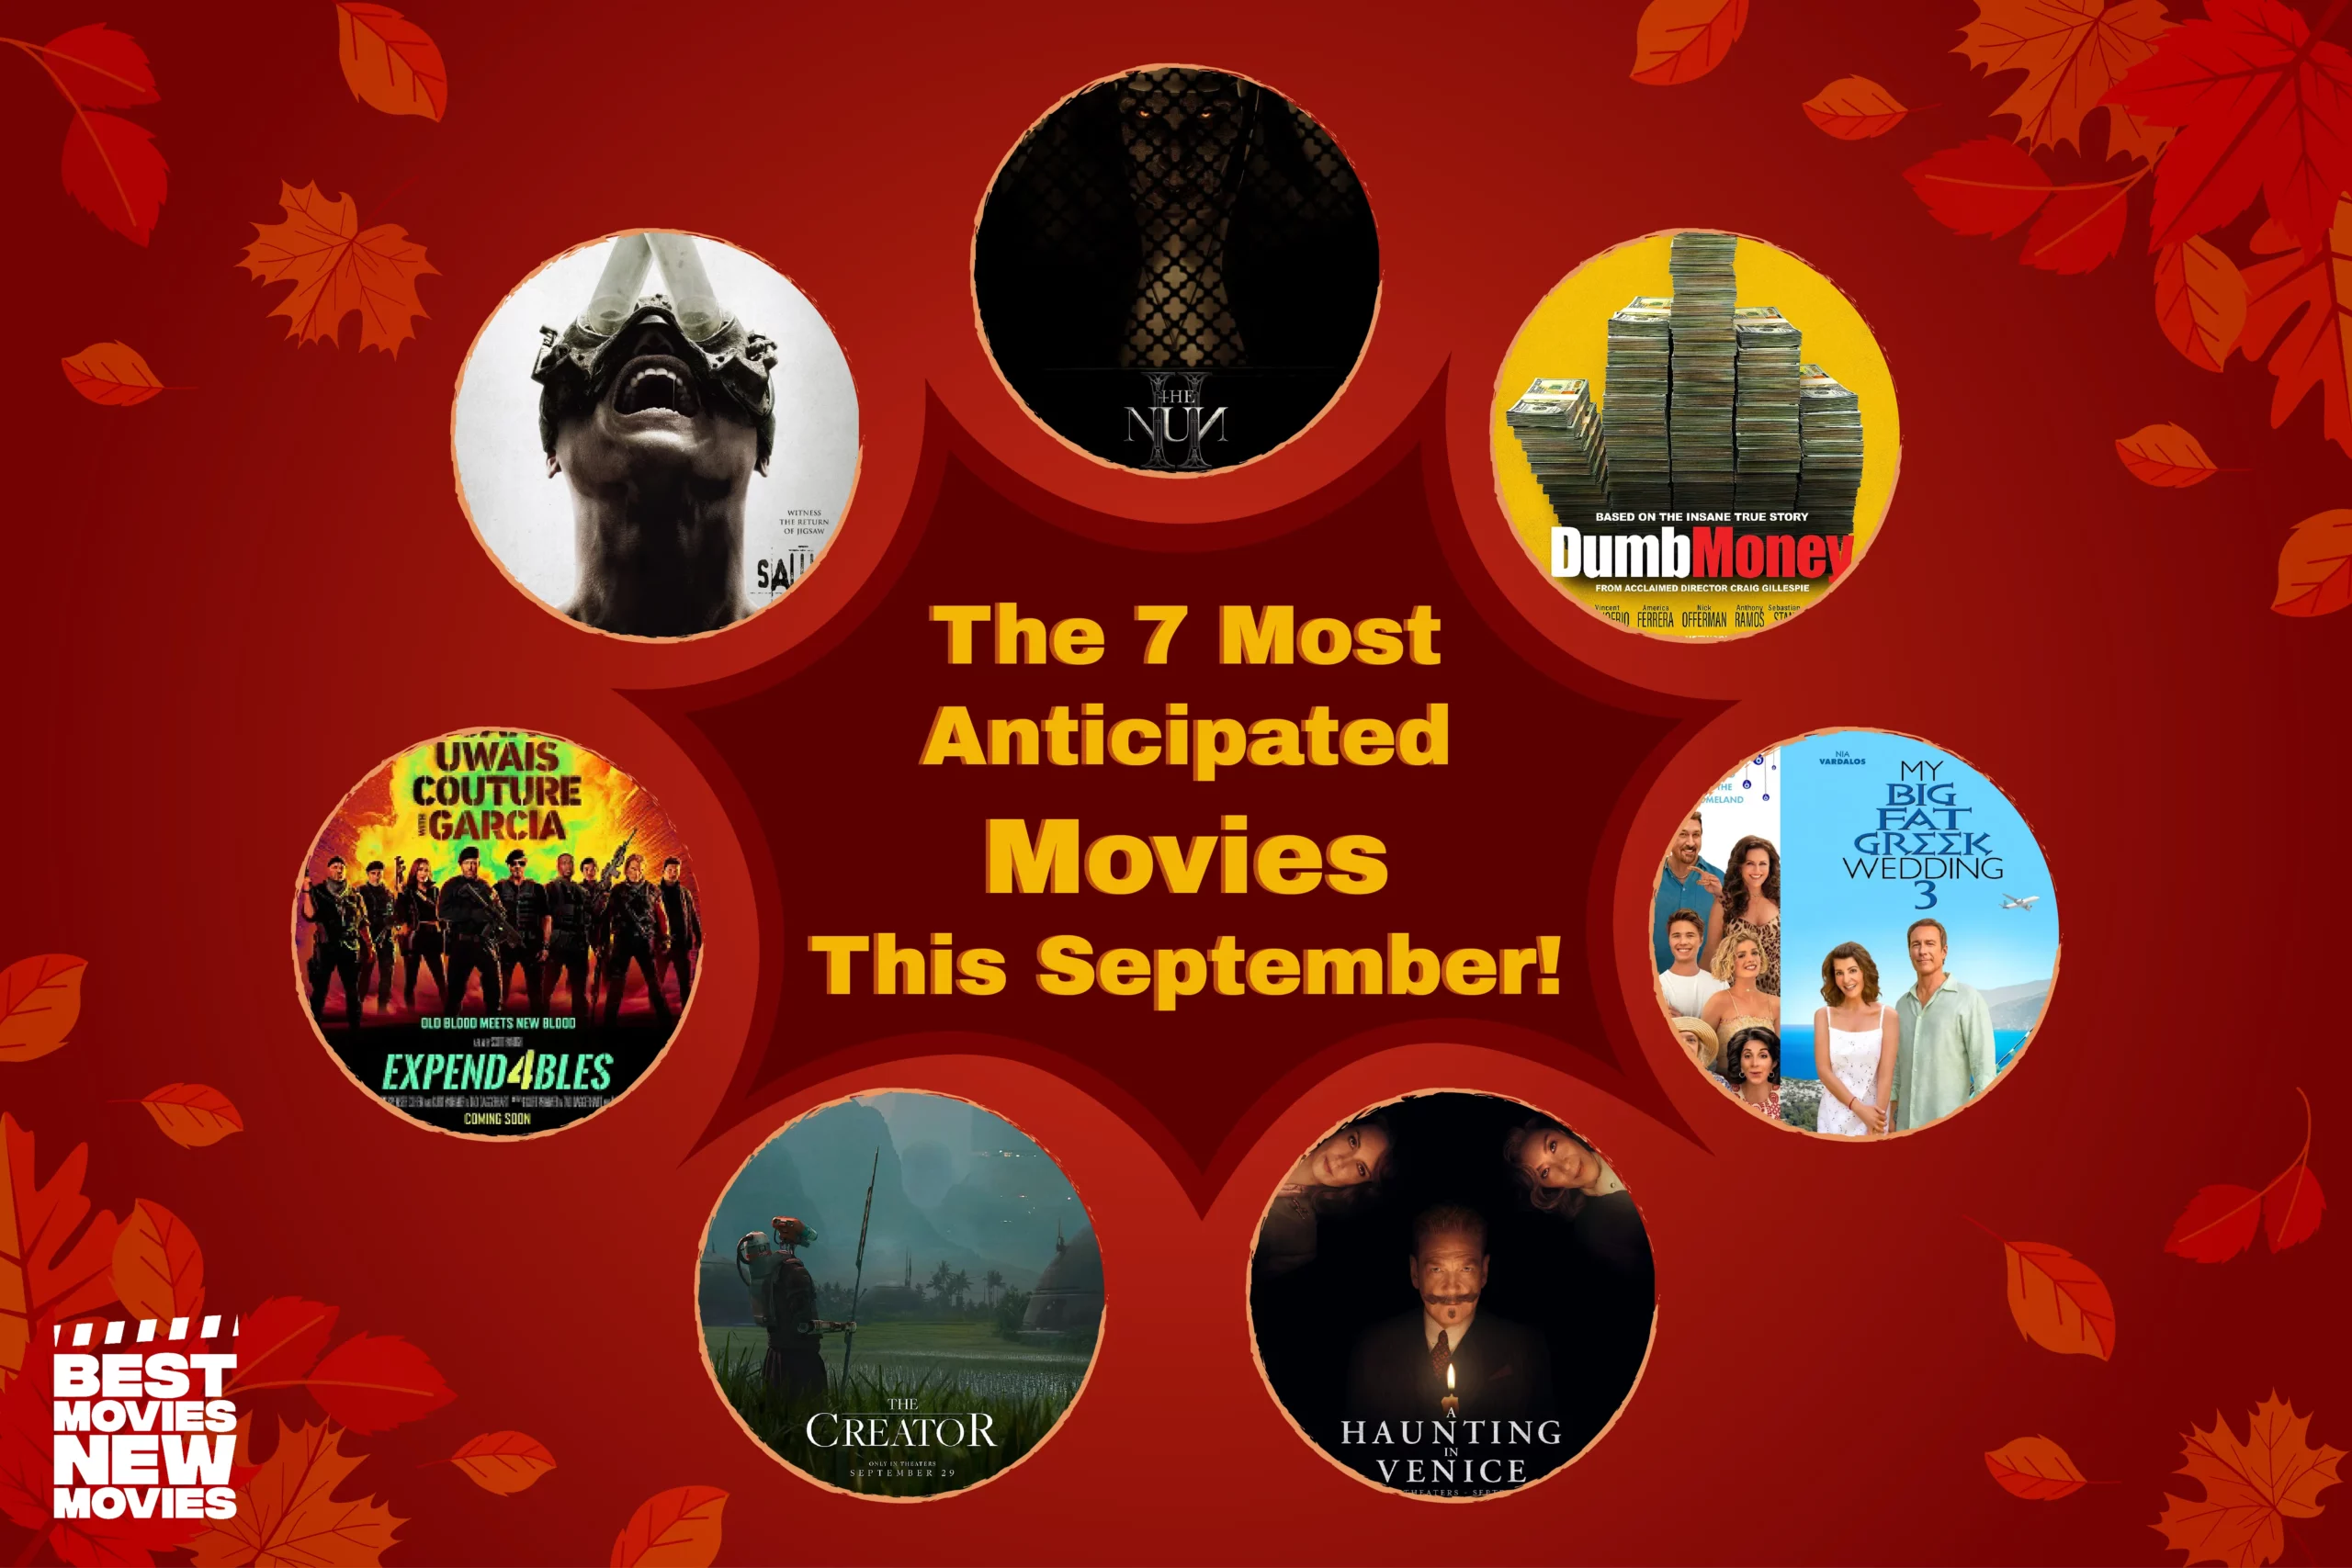 Most Anticipated Movies This September